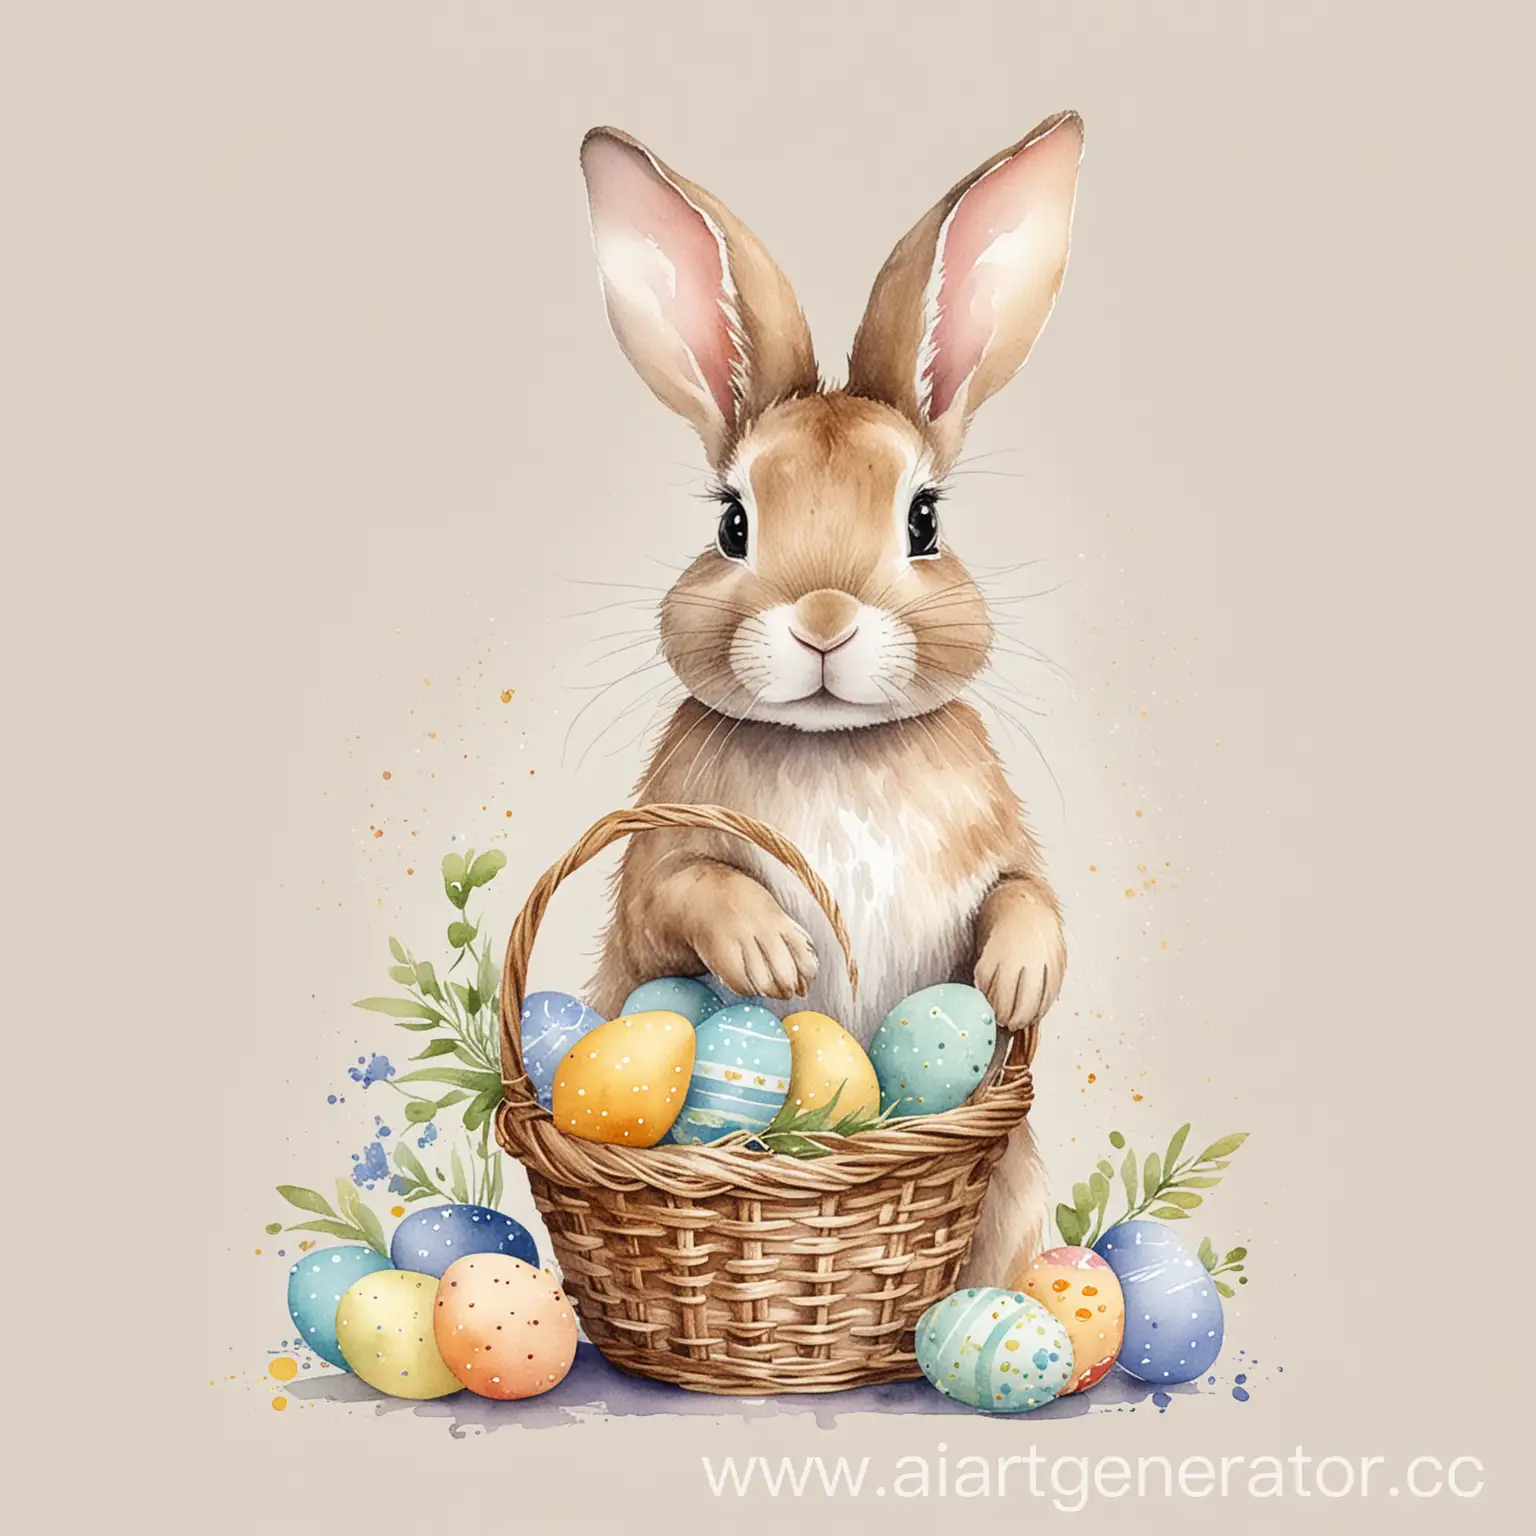 watercolor rabbit with an Easter basket on white background